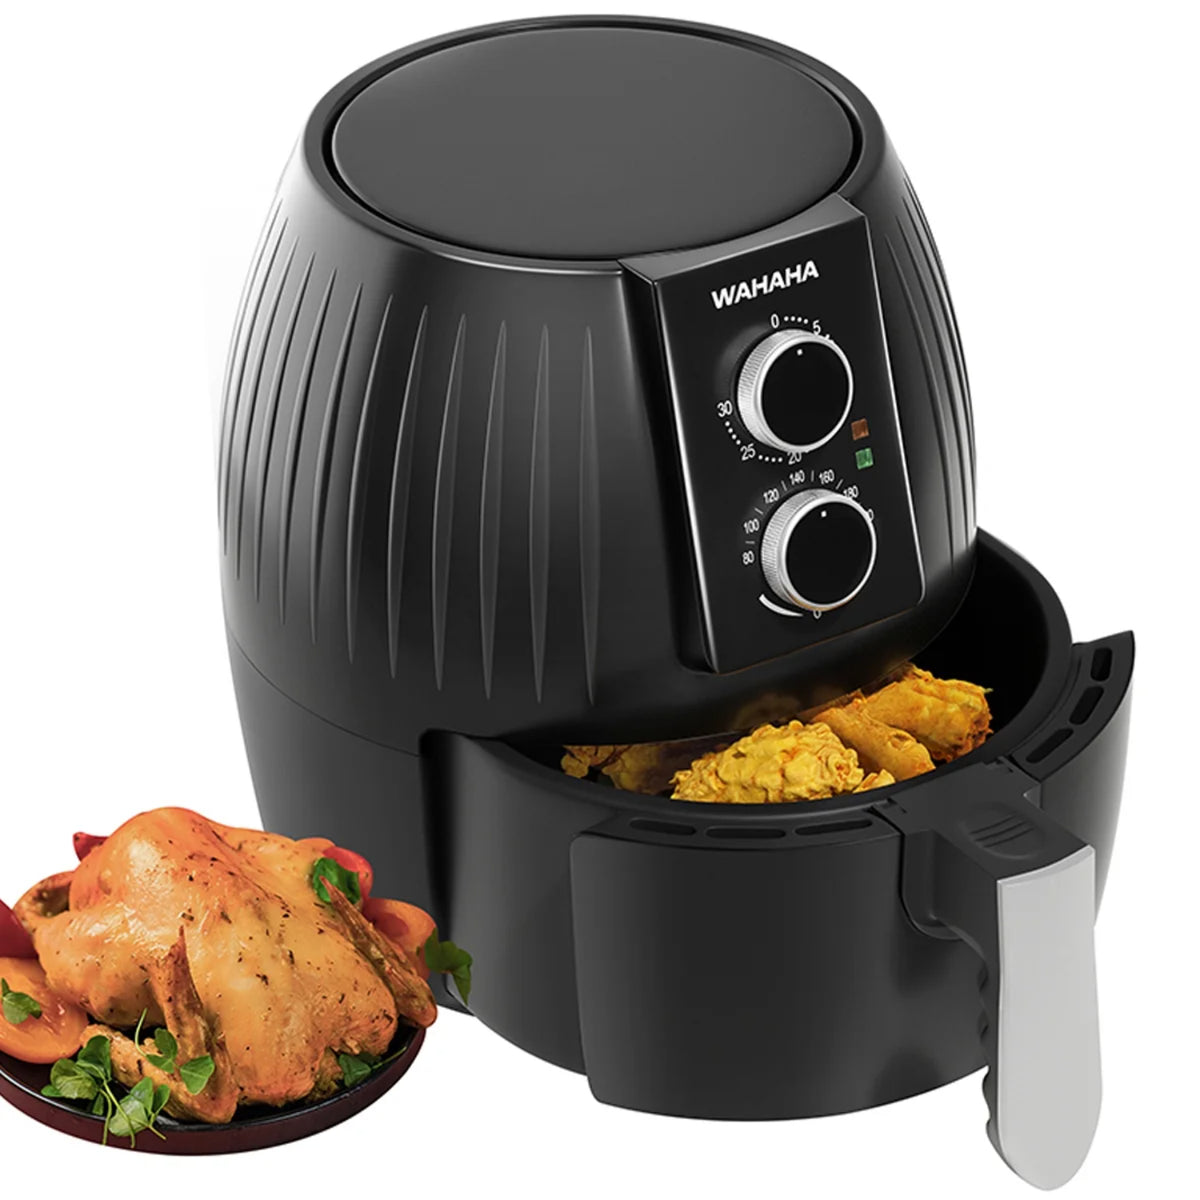 WHALL Air Fryer - 6.2QT Air Fryer Oven, 12-in-1 Stainless Steel